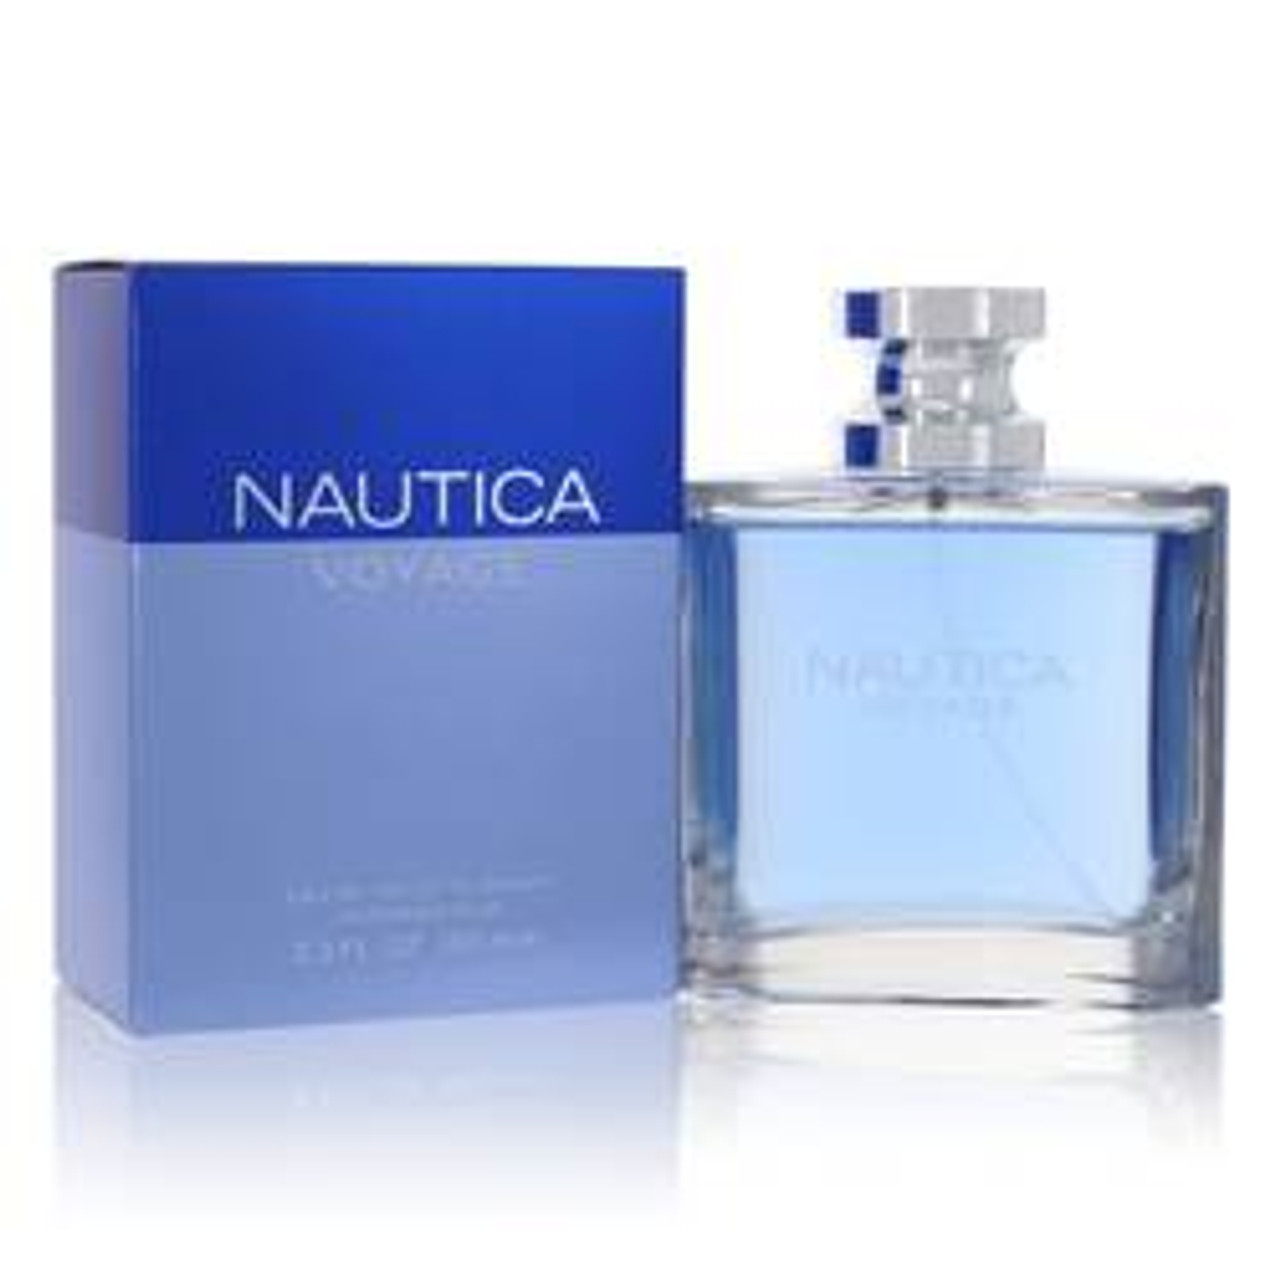 Nautica Voyage Cologne By Nautica Eau De Toilette Spray 3.4 oz for Men - [From 50.33 - Choose pk Qty ] - *Ships from Miami